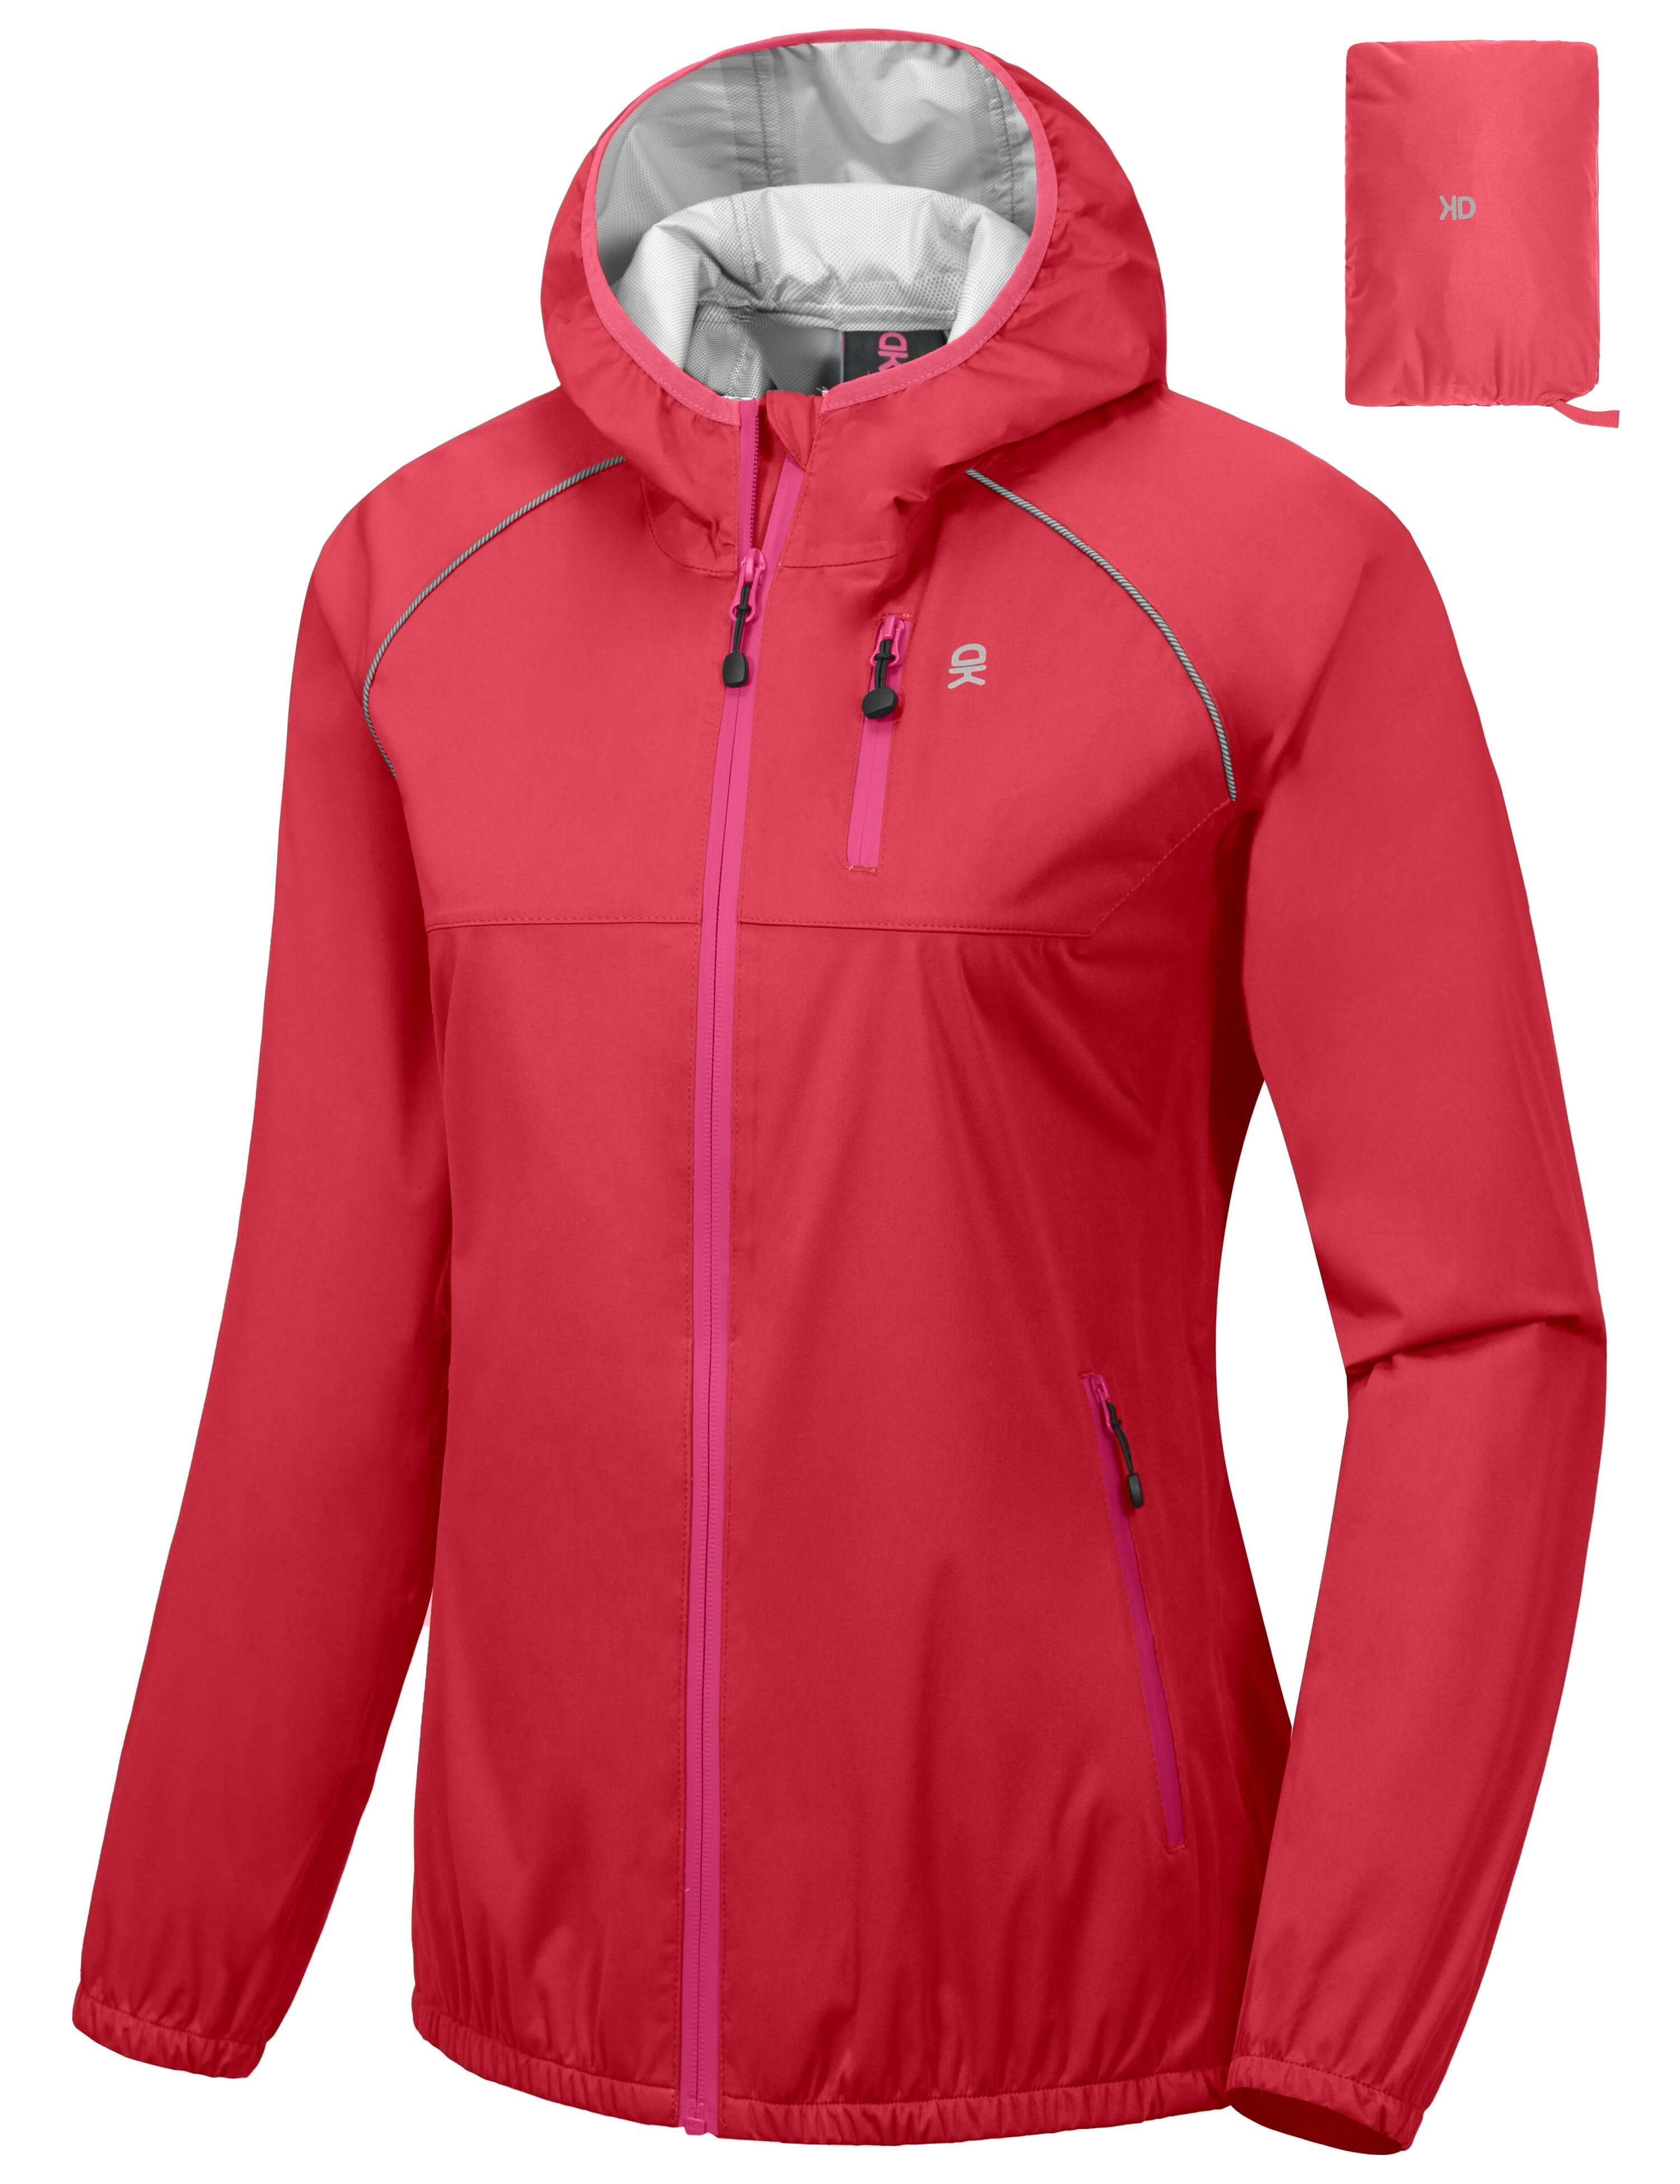 How to Choose a Rain Jacket & 5-Step Fit Guide | Burton Snowboards